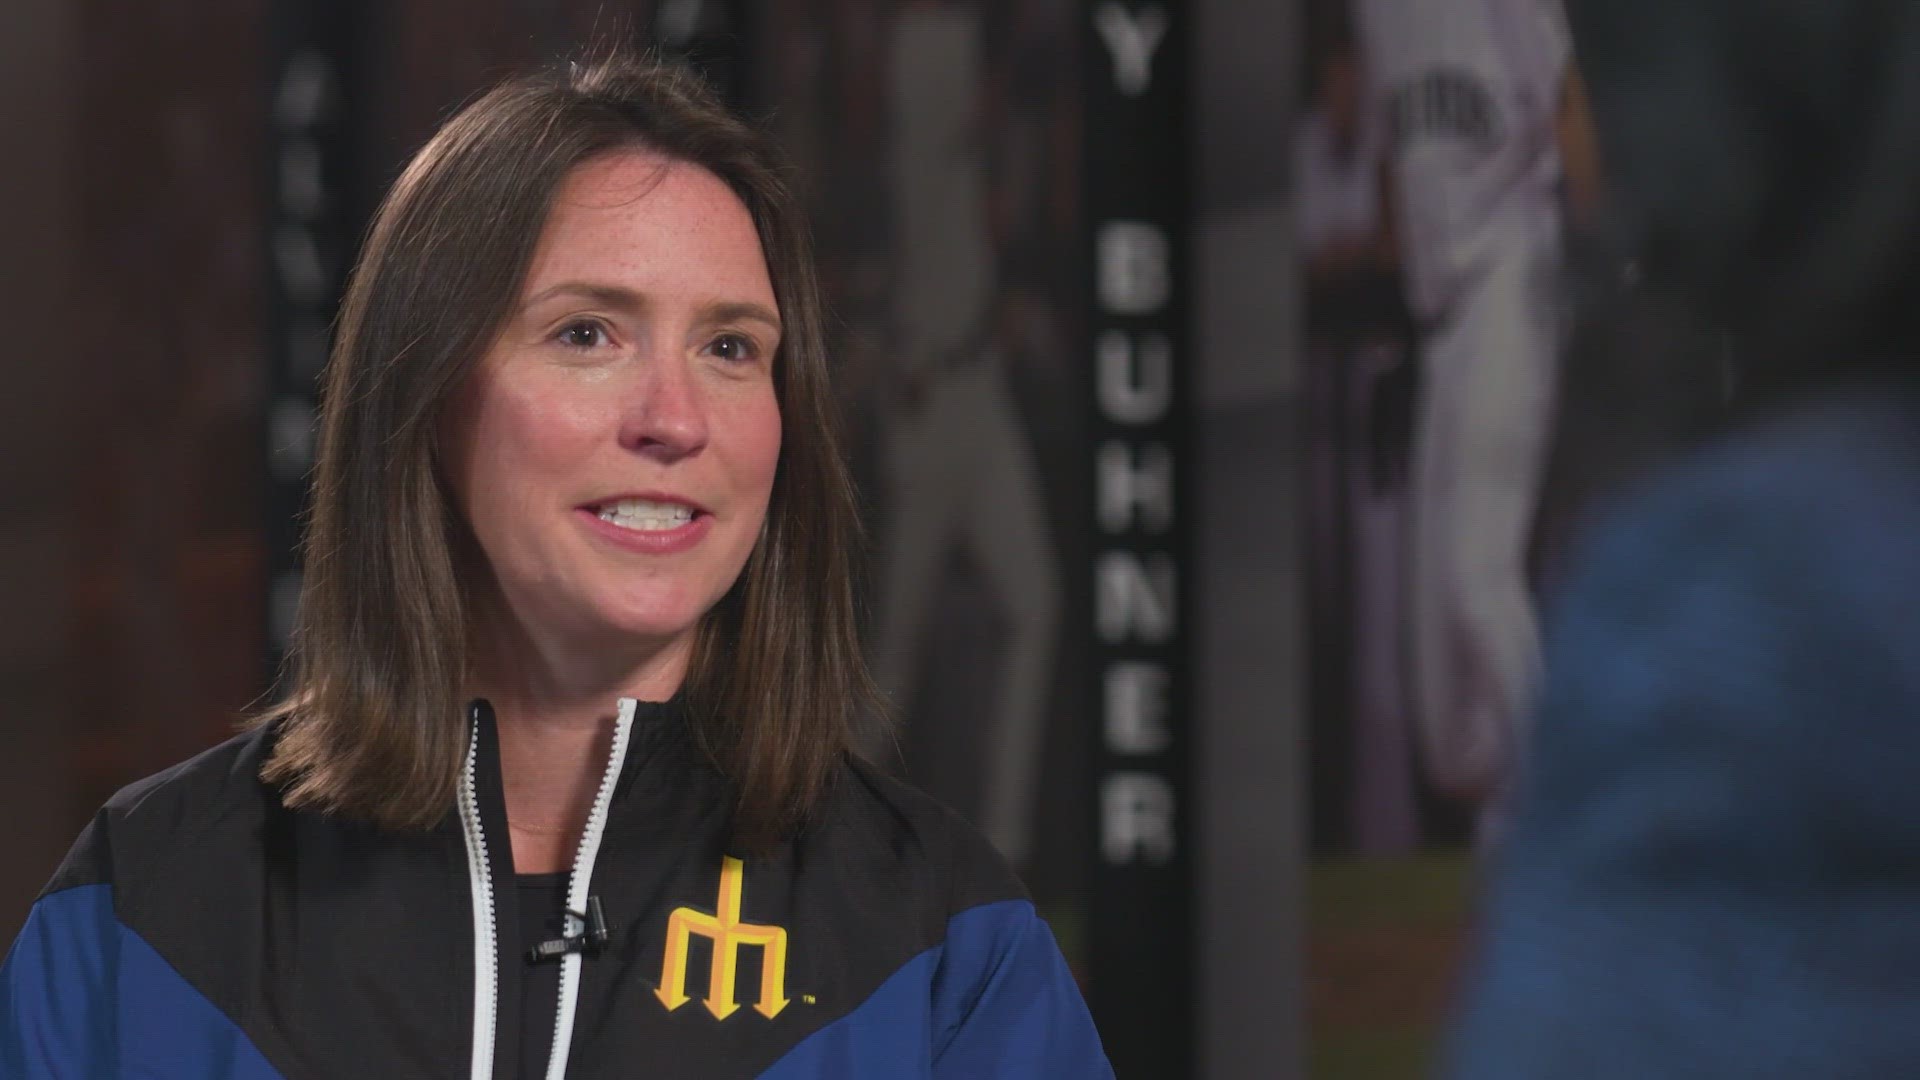 Griggs became the first female president in Mariners franchise history. Now she has her eyes set on a World Series title.